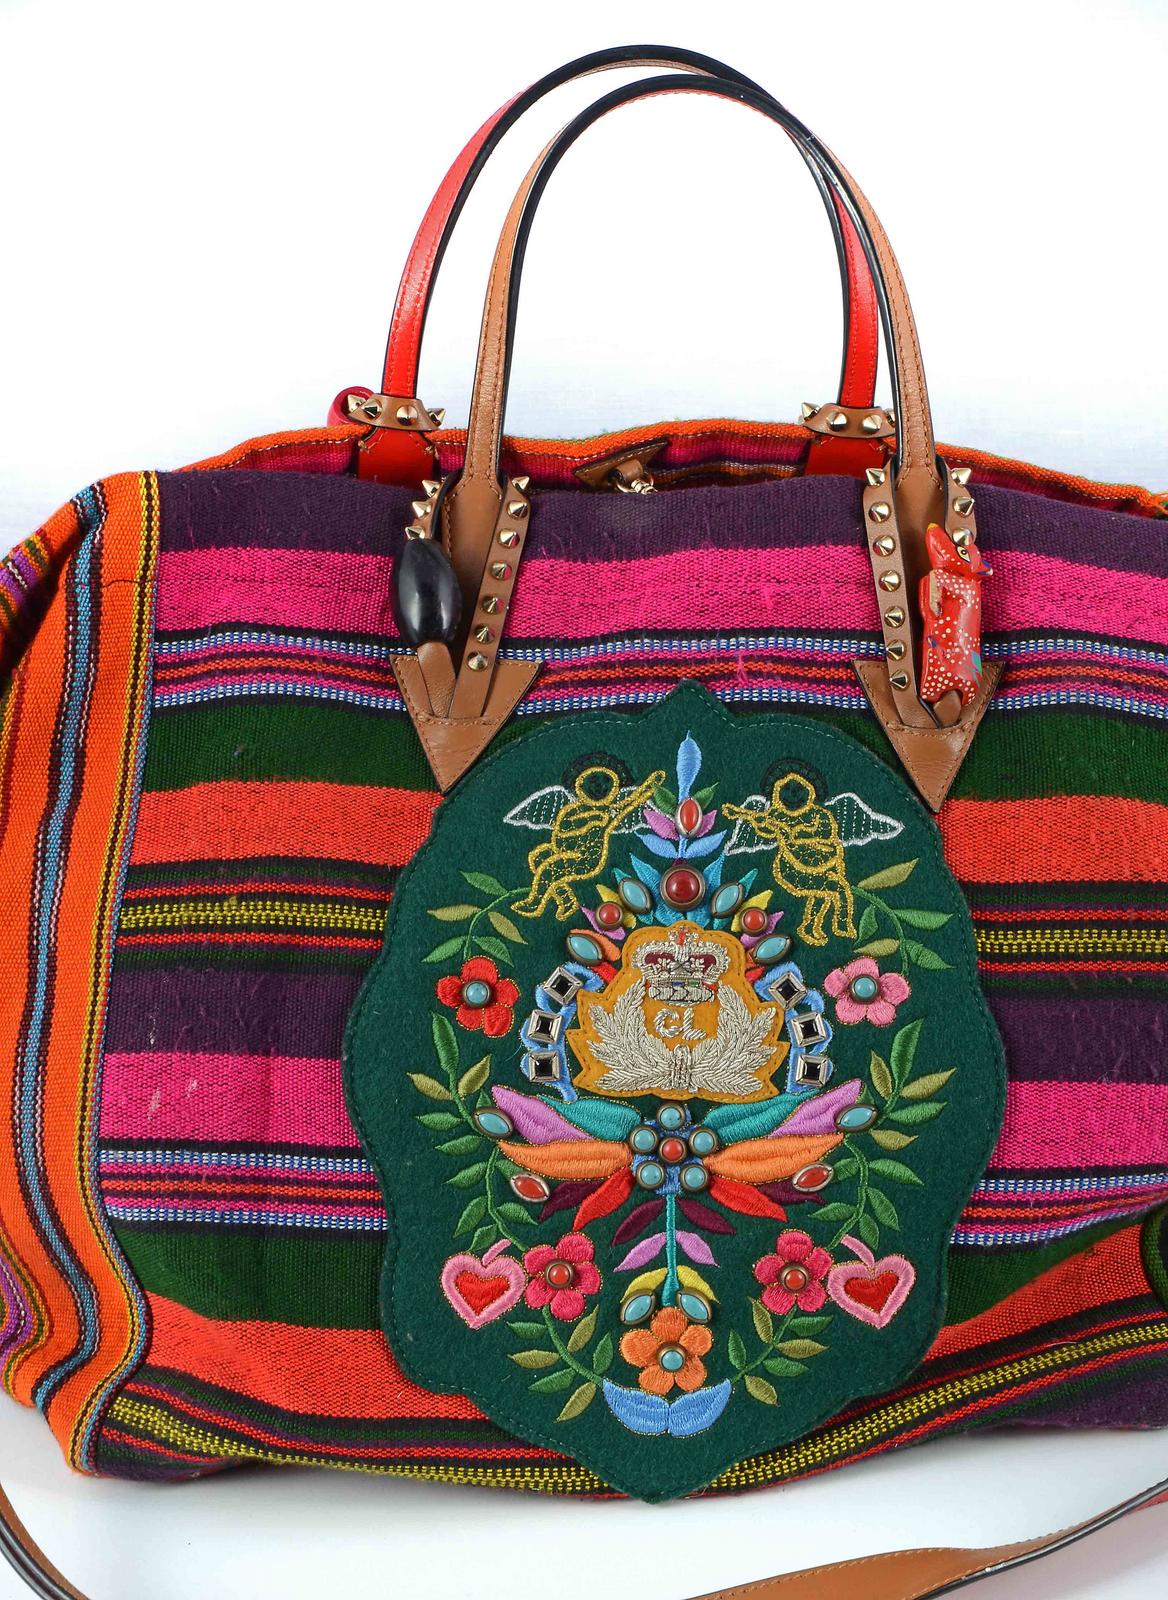 MEXICABA: Louboutin's Latest Collaboration With Taller Maya - InMexico